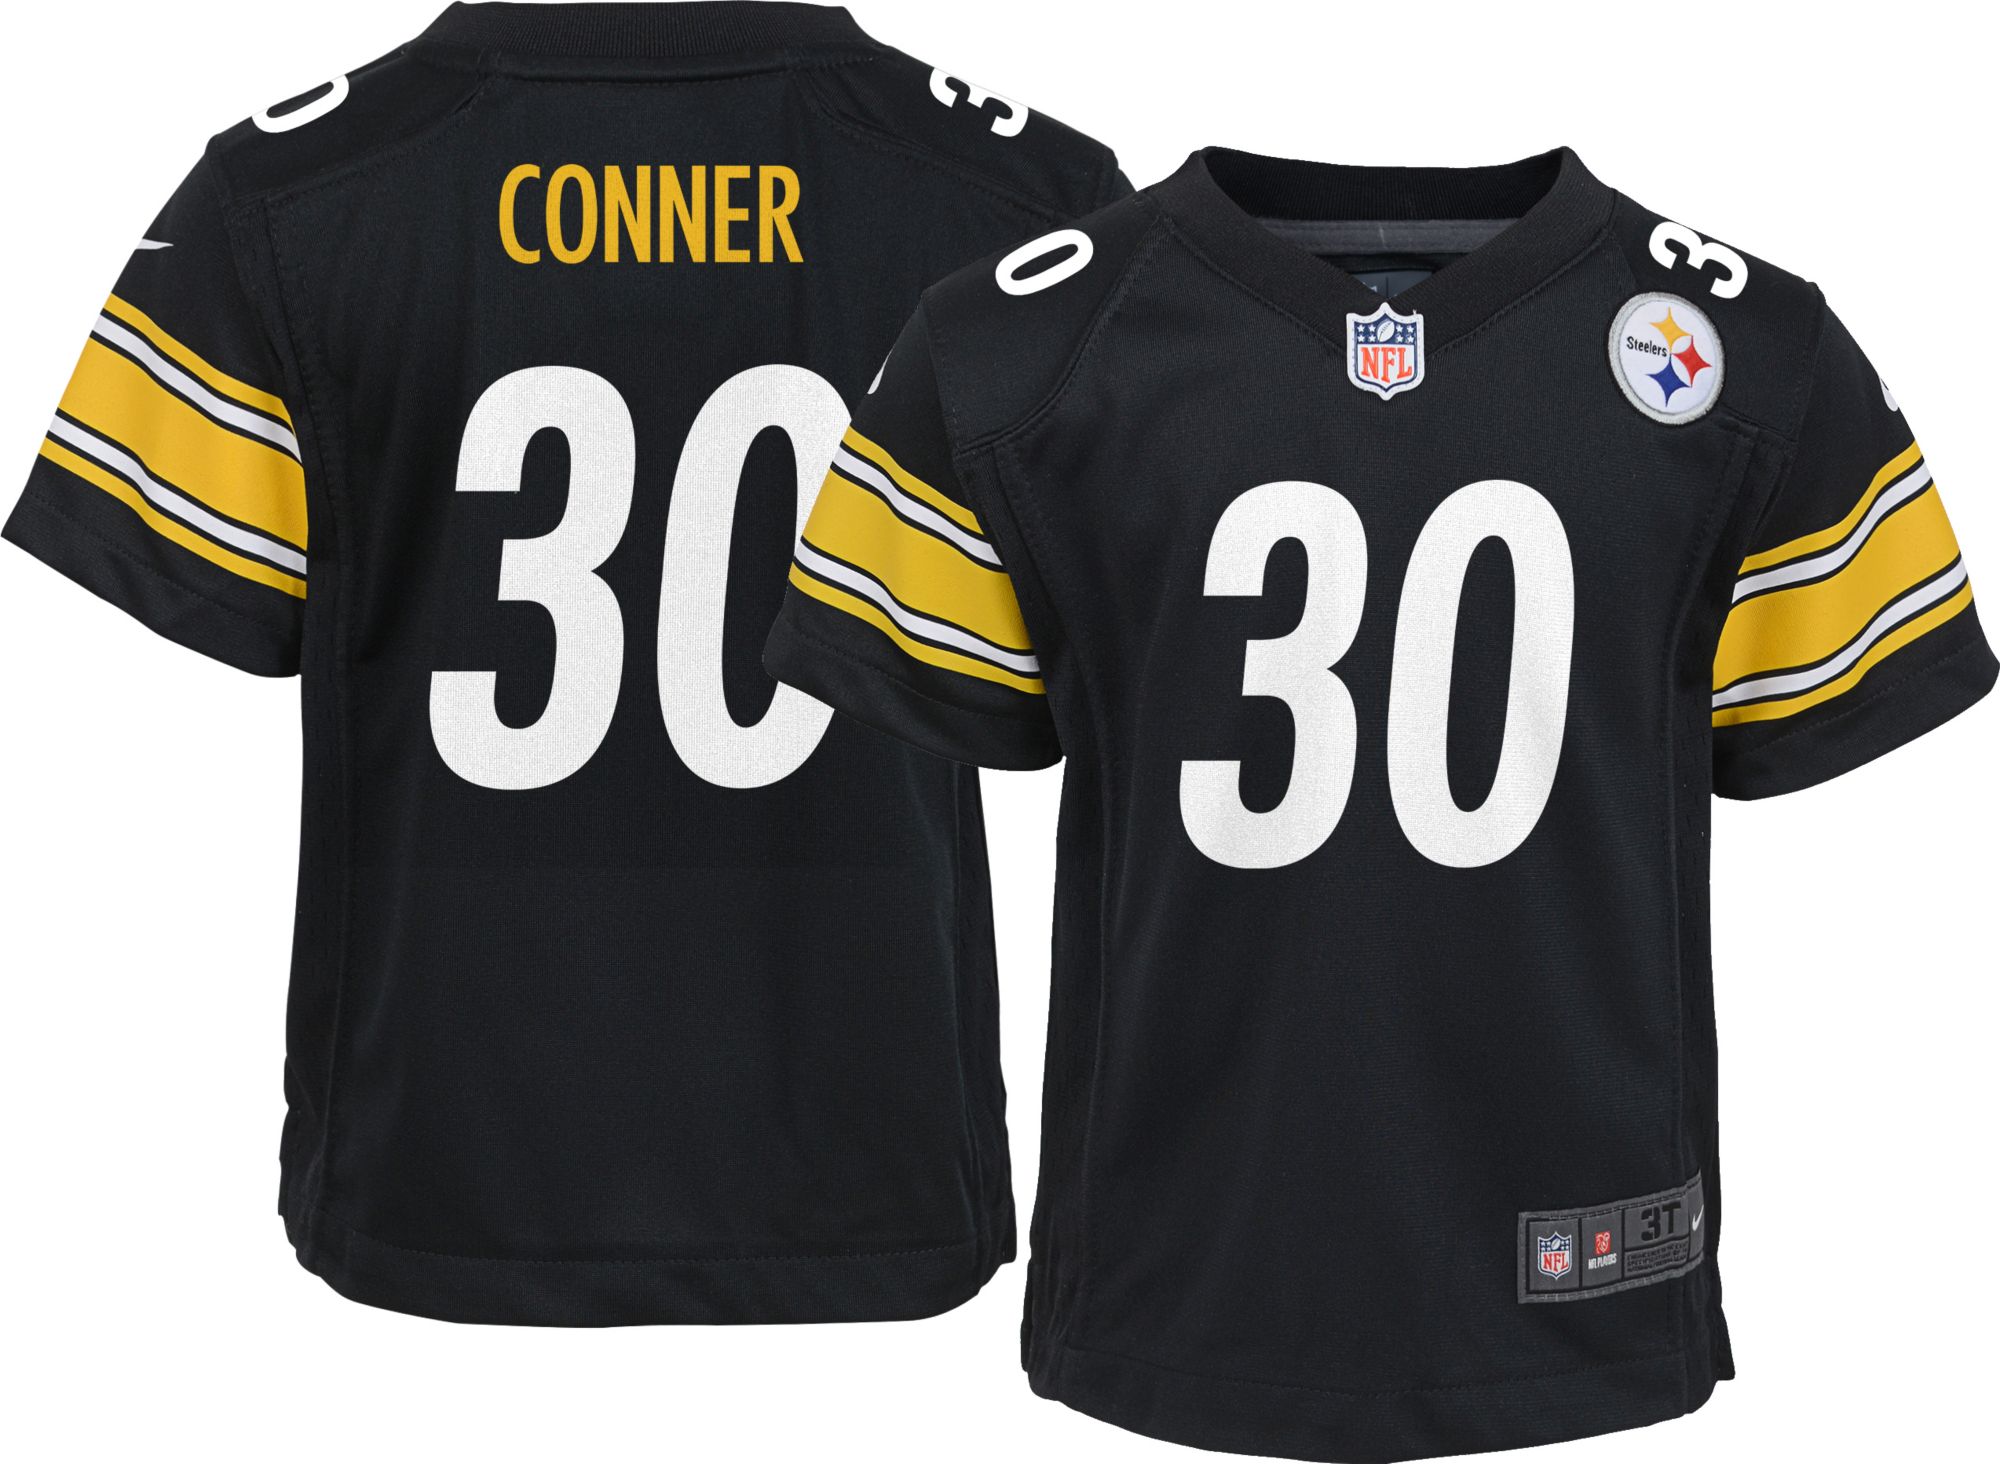 black and white steelers jersey